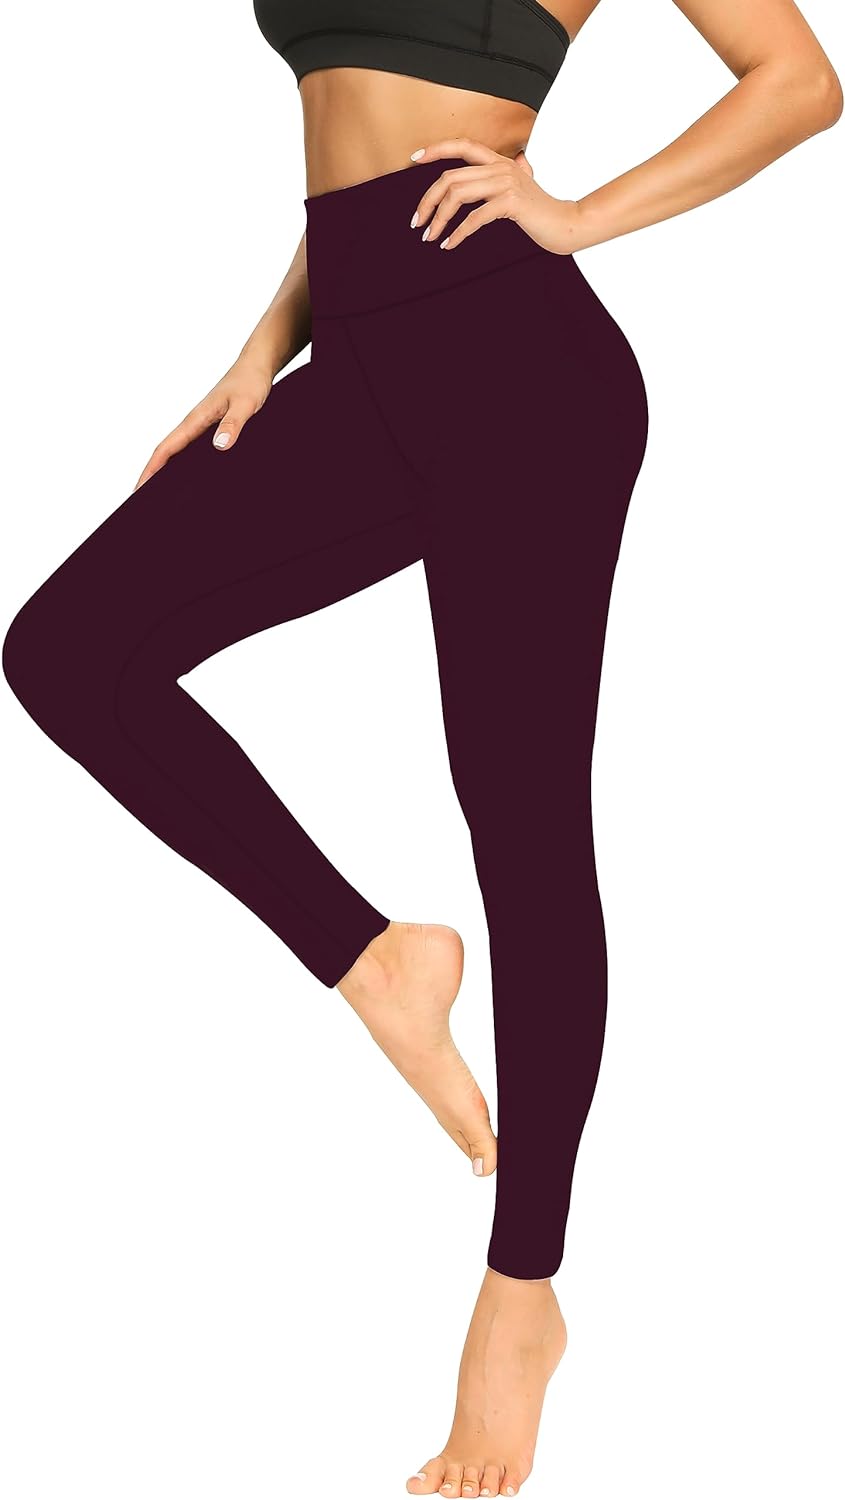 High Waisted Leggings for Women - No See-Through Tummy Control